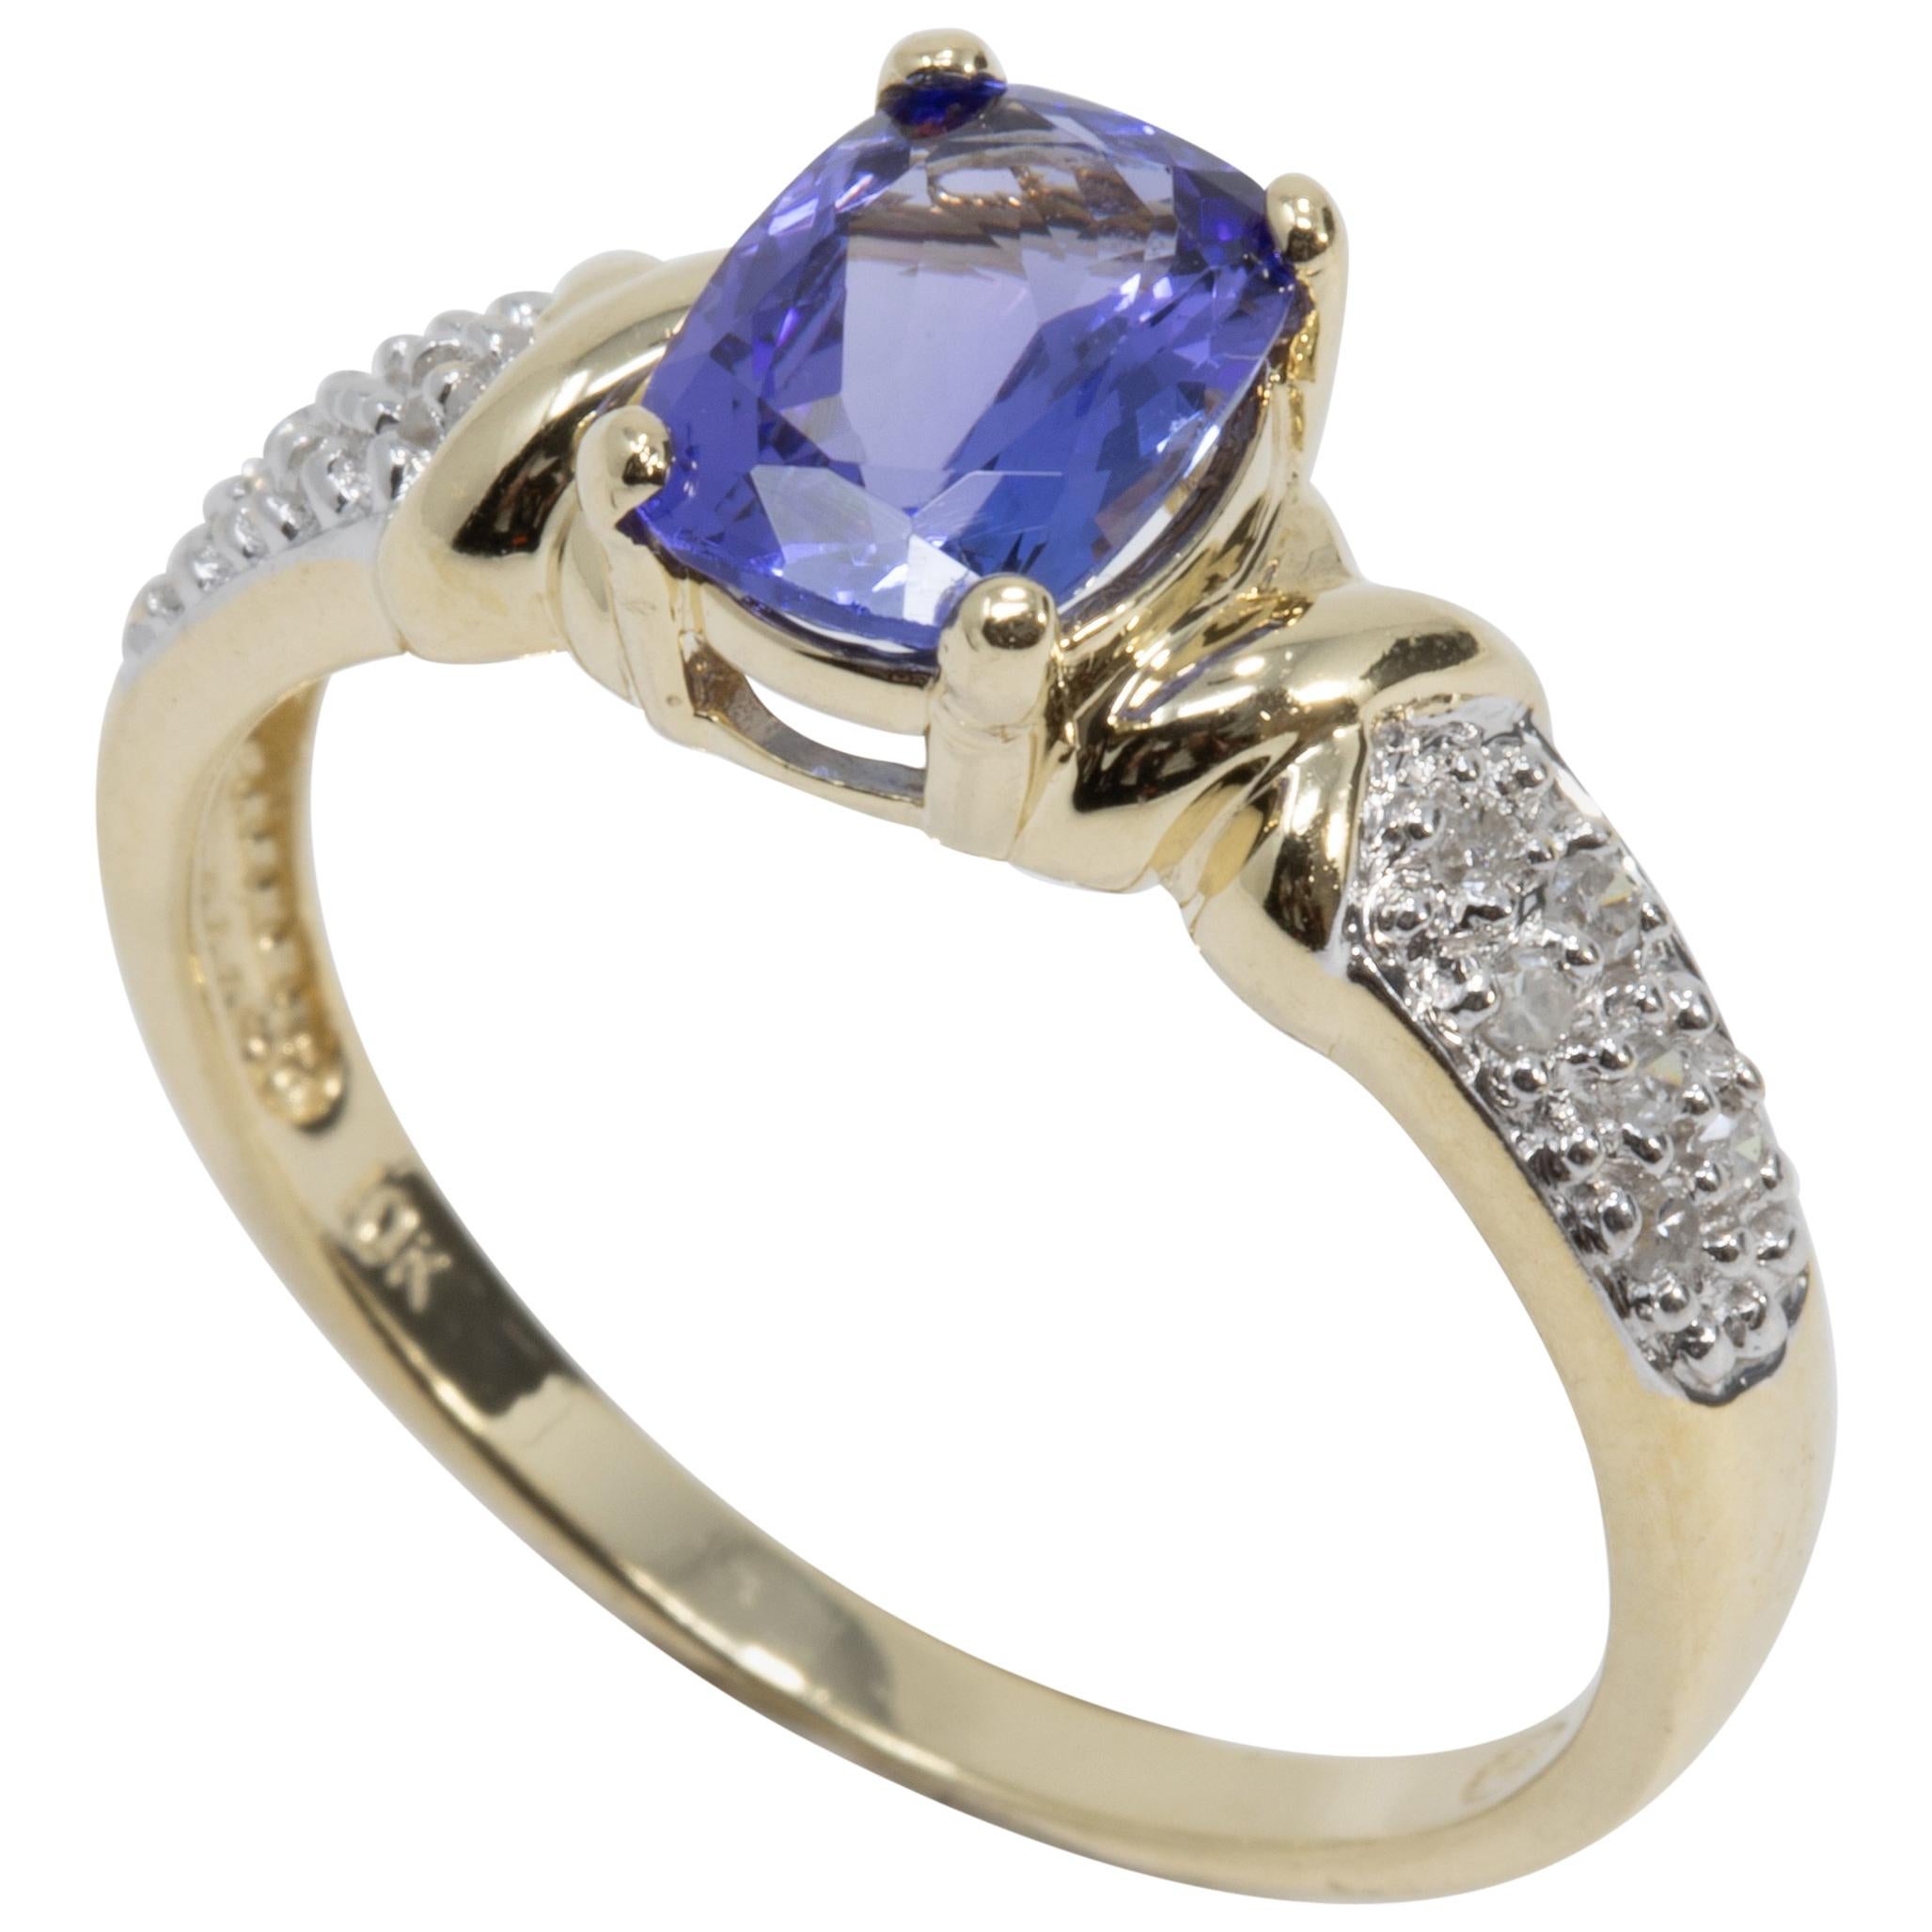 Amethyst and Diamond 10 Karat Yellow Gold Ring, Solitaire Prong Setting